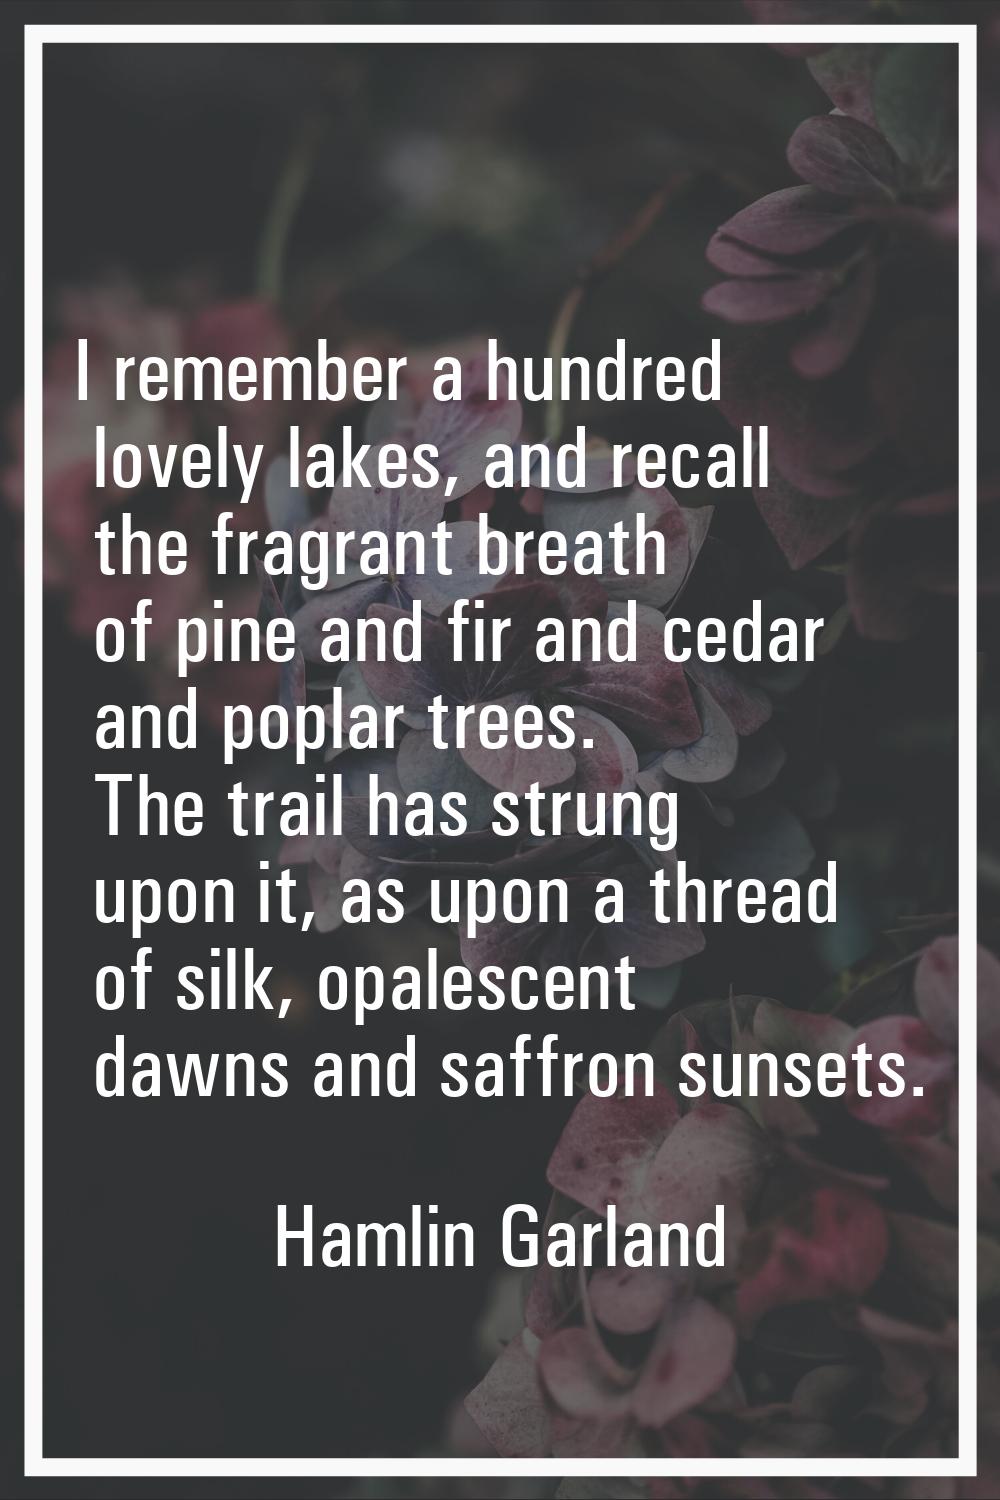 I remember a hundred lovely lakes, and recall the fragrant breath of pine and fir and cedar and pop